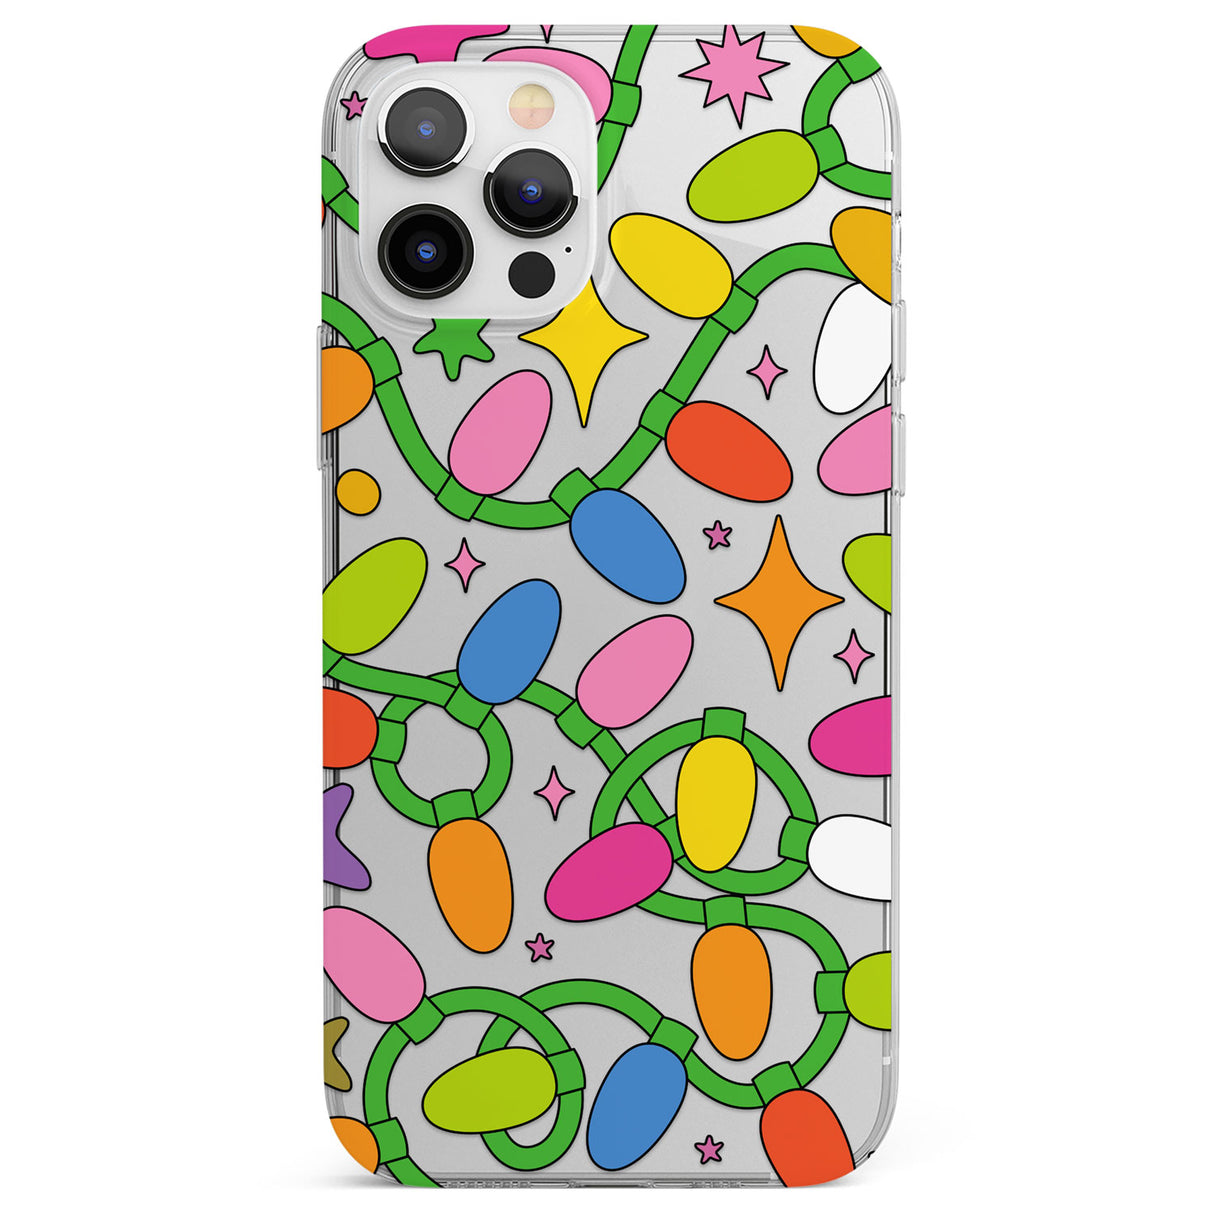 Festive Lights Pattern Phone Case for iPhone 12 Pro